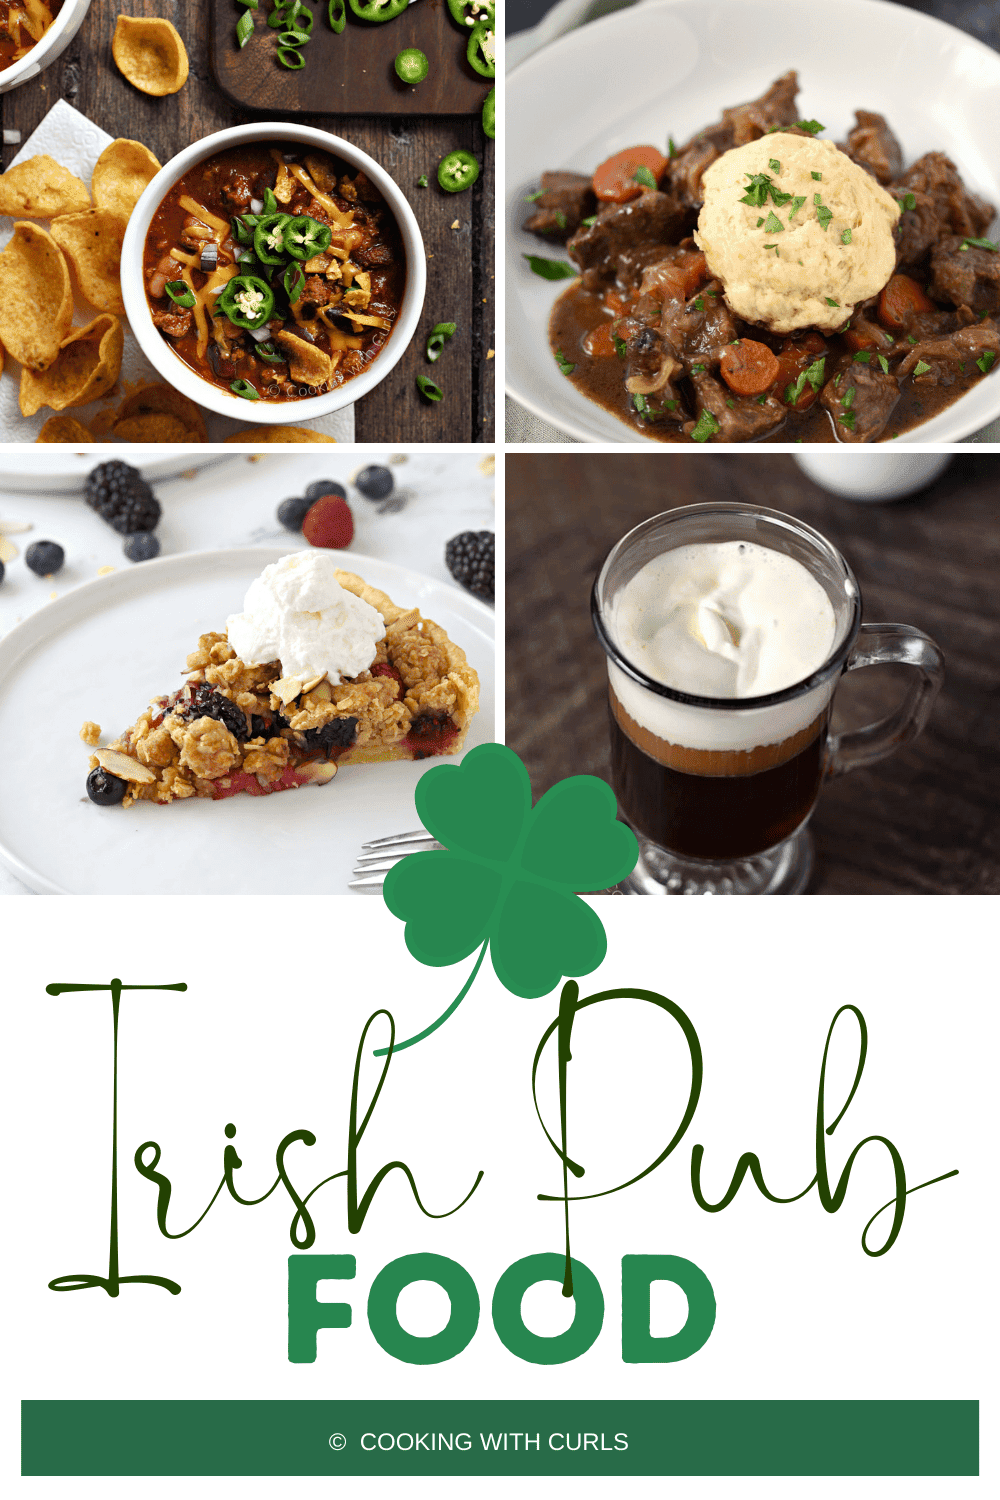 Second Irish Pub Food collage with four food images, a green shamrock, and title graphic across the bottom.